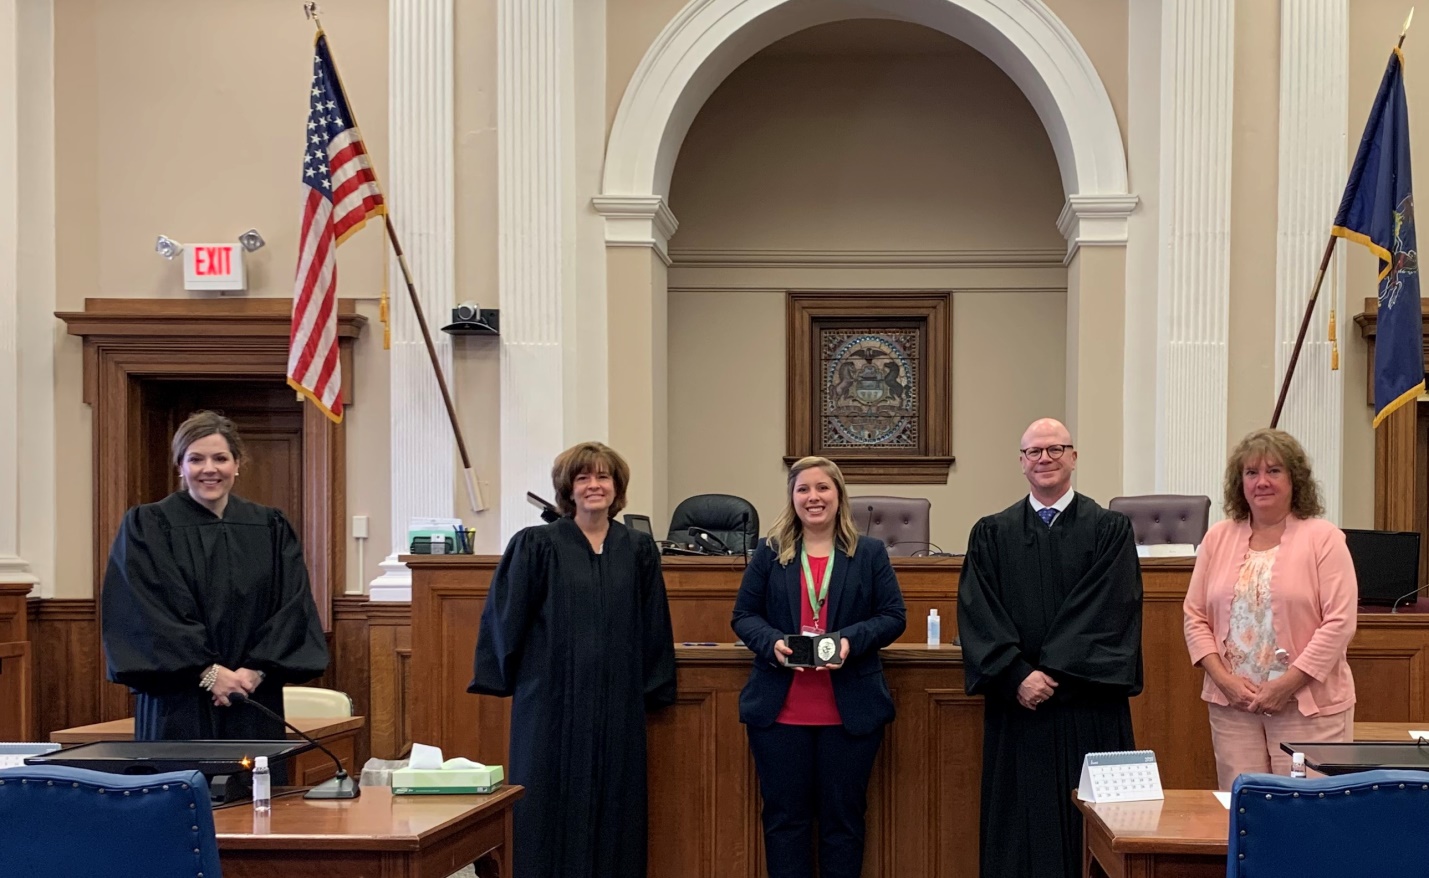 left to right: The Honorable Mary Beth Shank, The Honorable Angela R. Krom, Probation Officer Harley Payne,  President Judge Shawn D. Meyers, Kathleen A. McGrath, Chief Juvenile Probation Officer